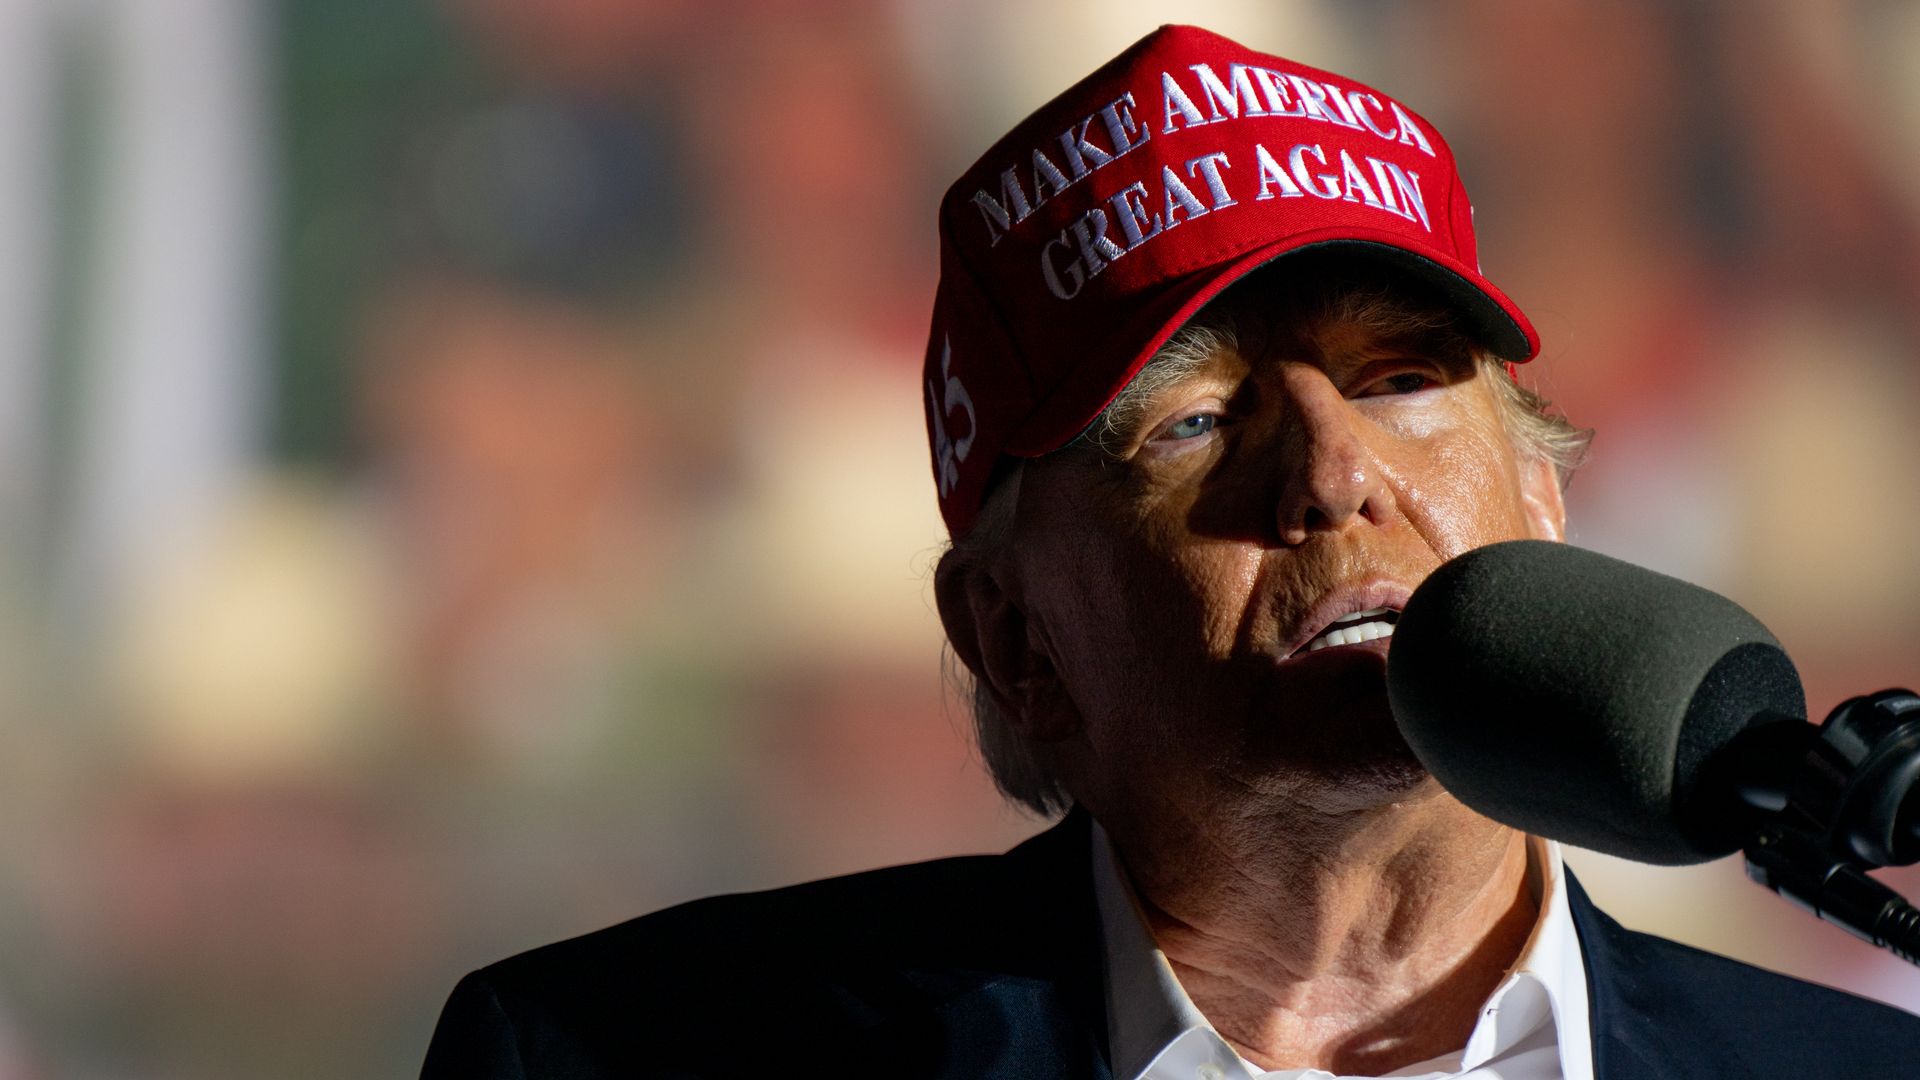 Former U.S President Donald Trump speaks at a 'Save America' rally on October 22, 2022 in Robstown, Texas.